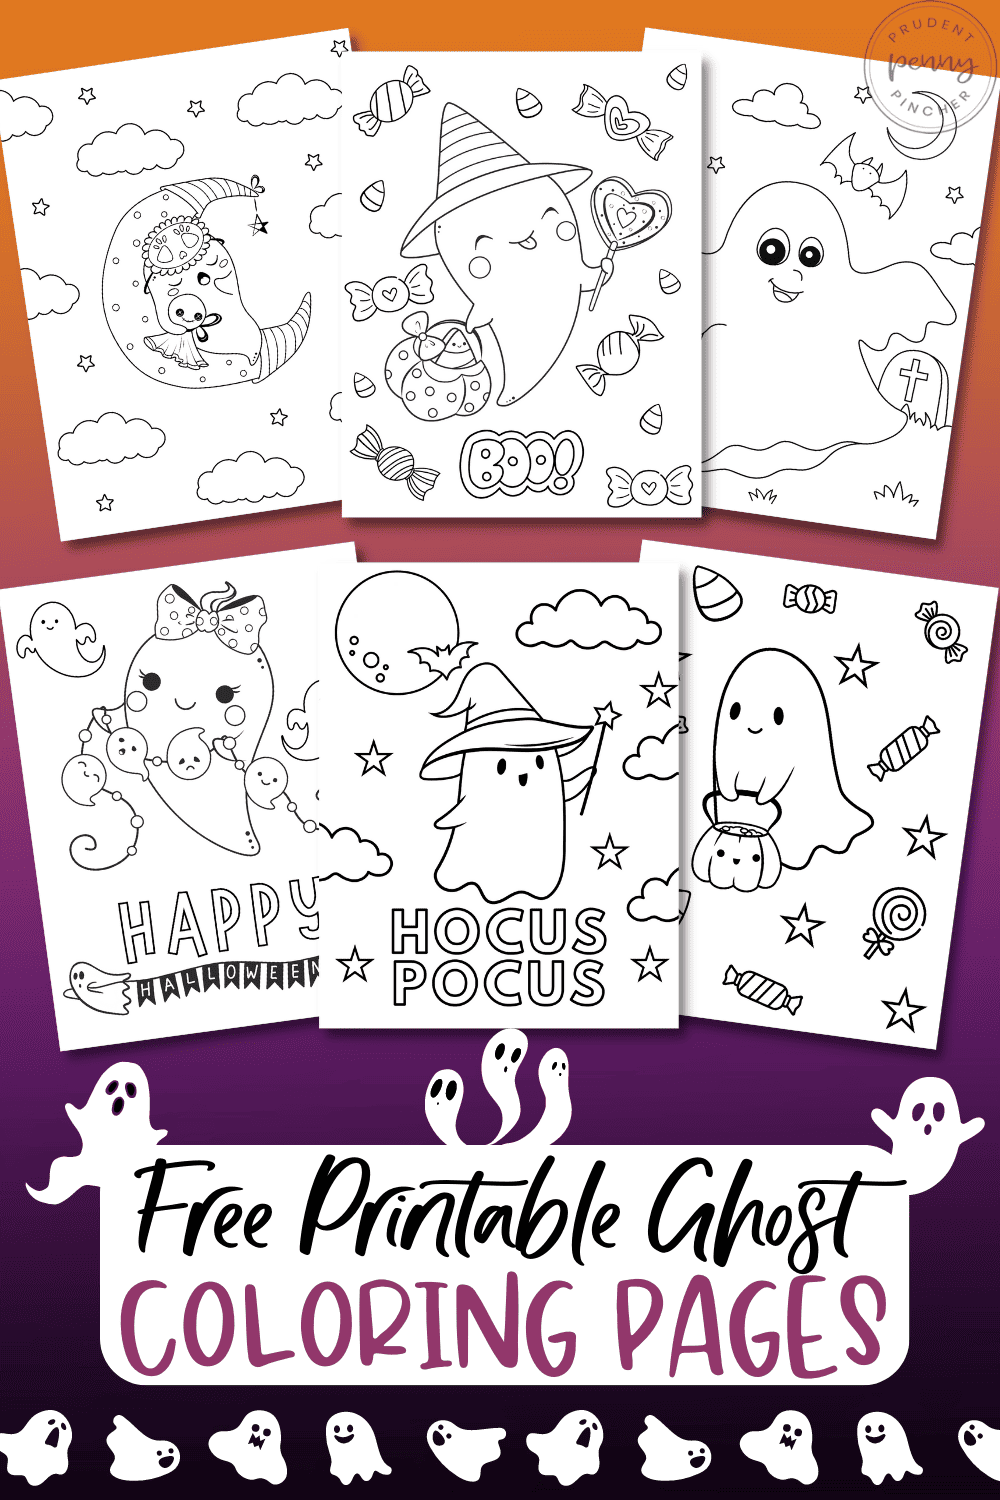 free printable ghost coloring pages for kids